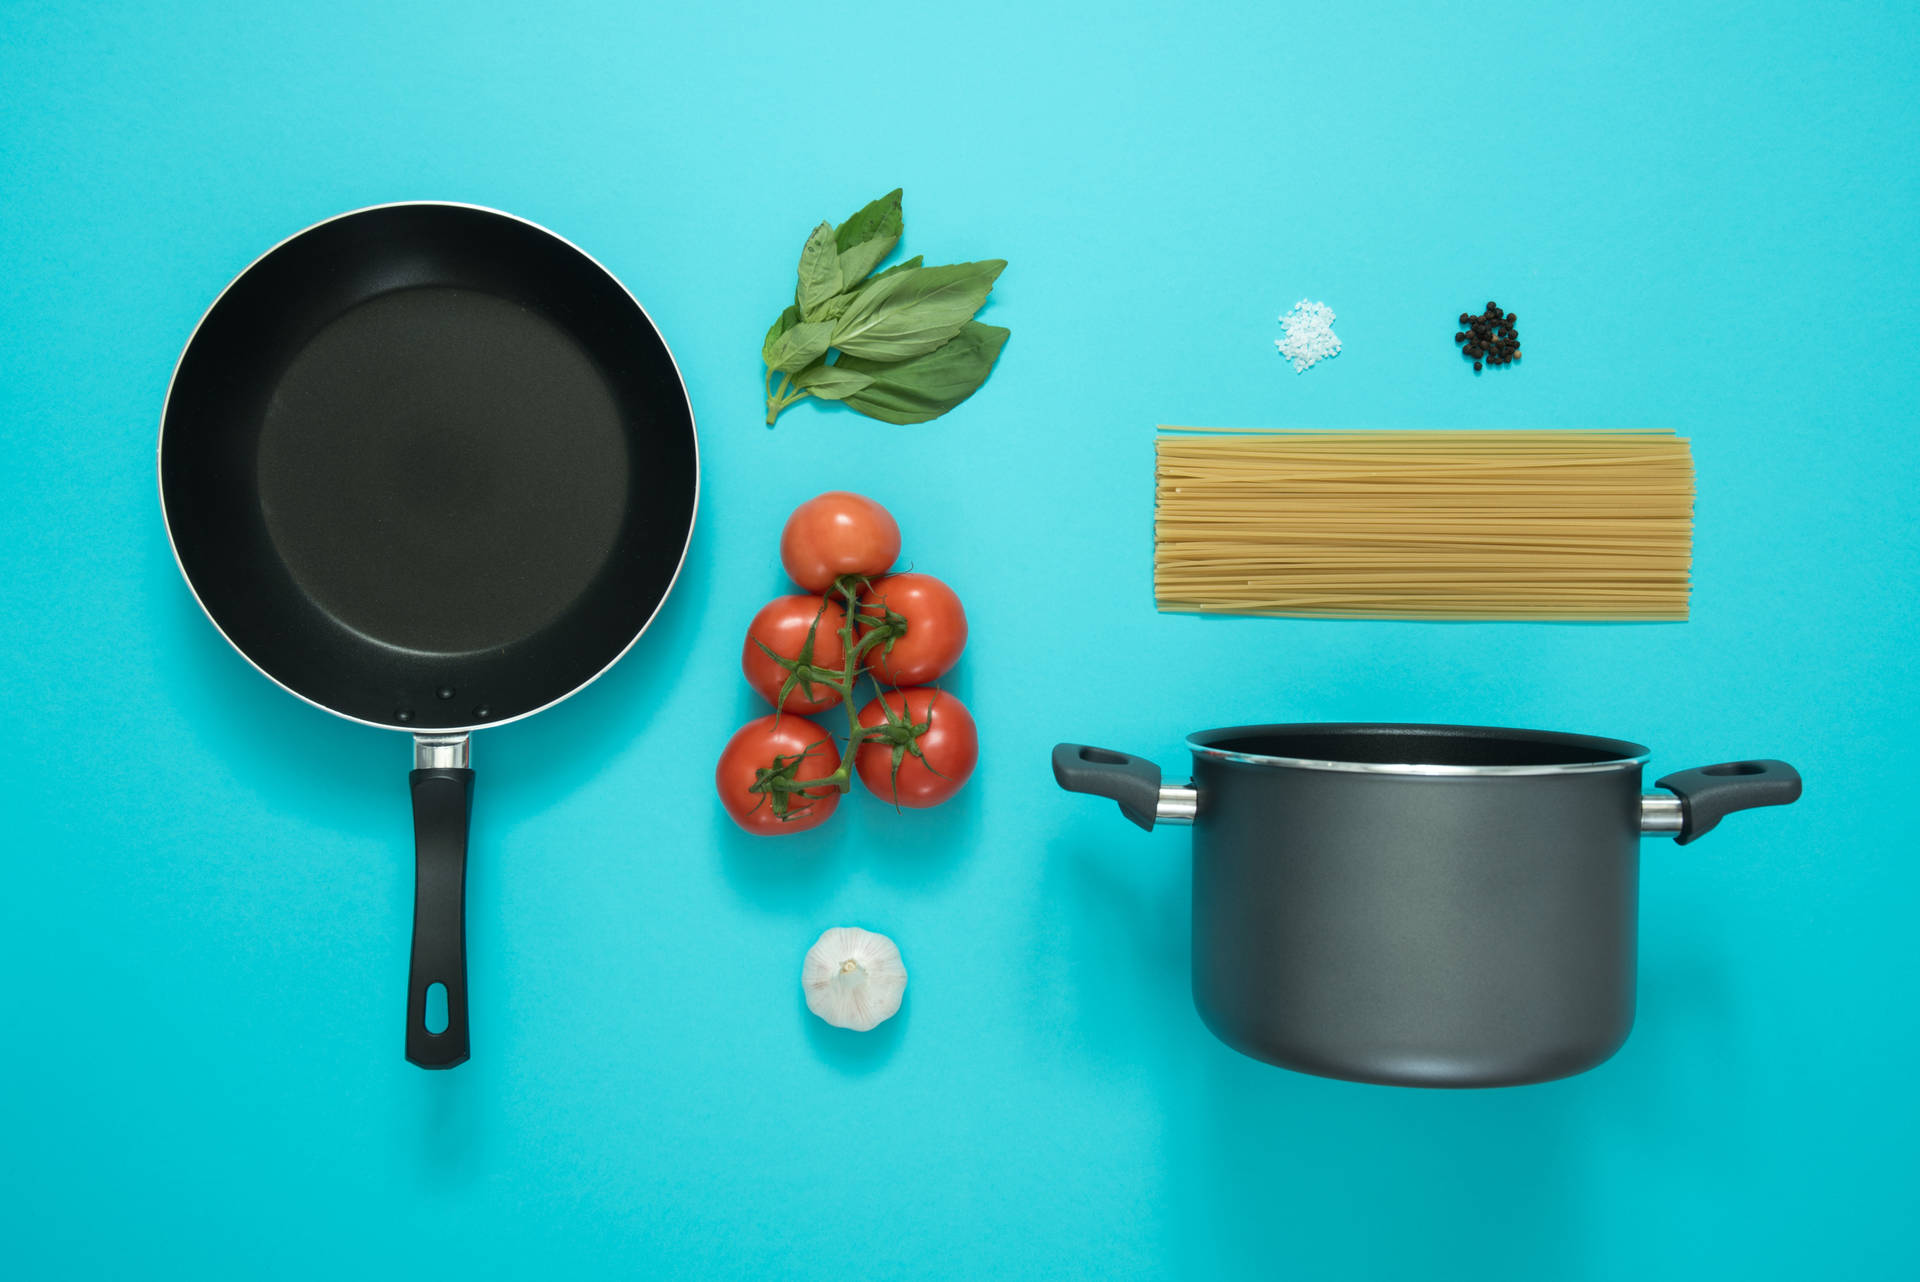 Get Creative In The Kitchen With These Cute Cooking Essentials! Background